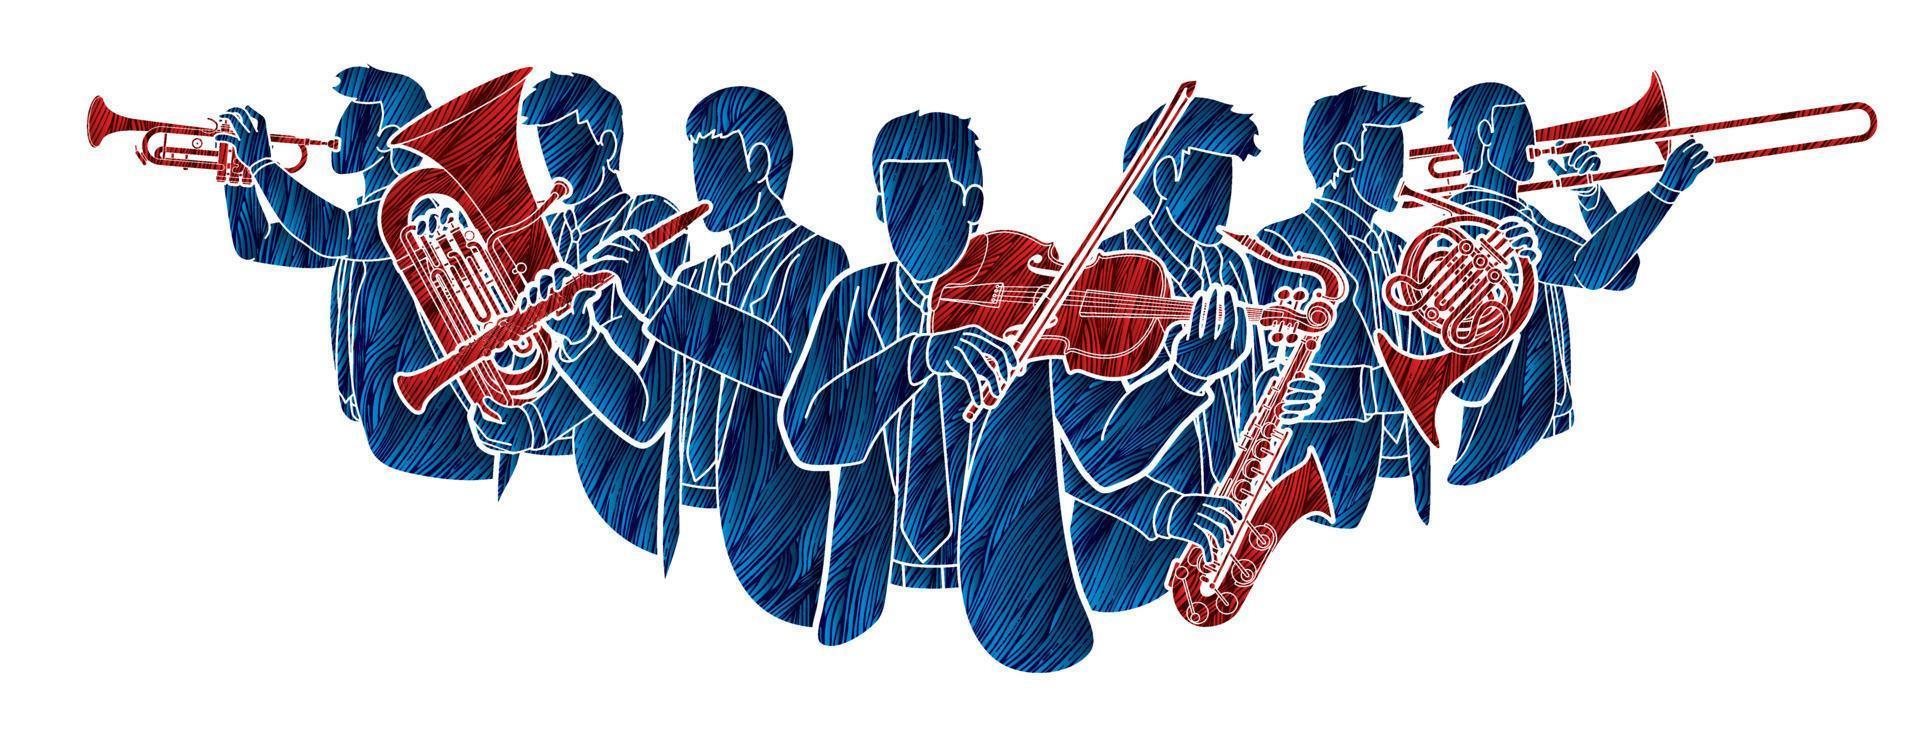 Group of Orchestra Players Instrument Musician vector